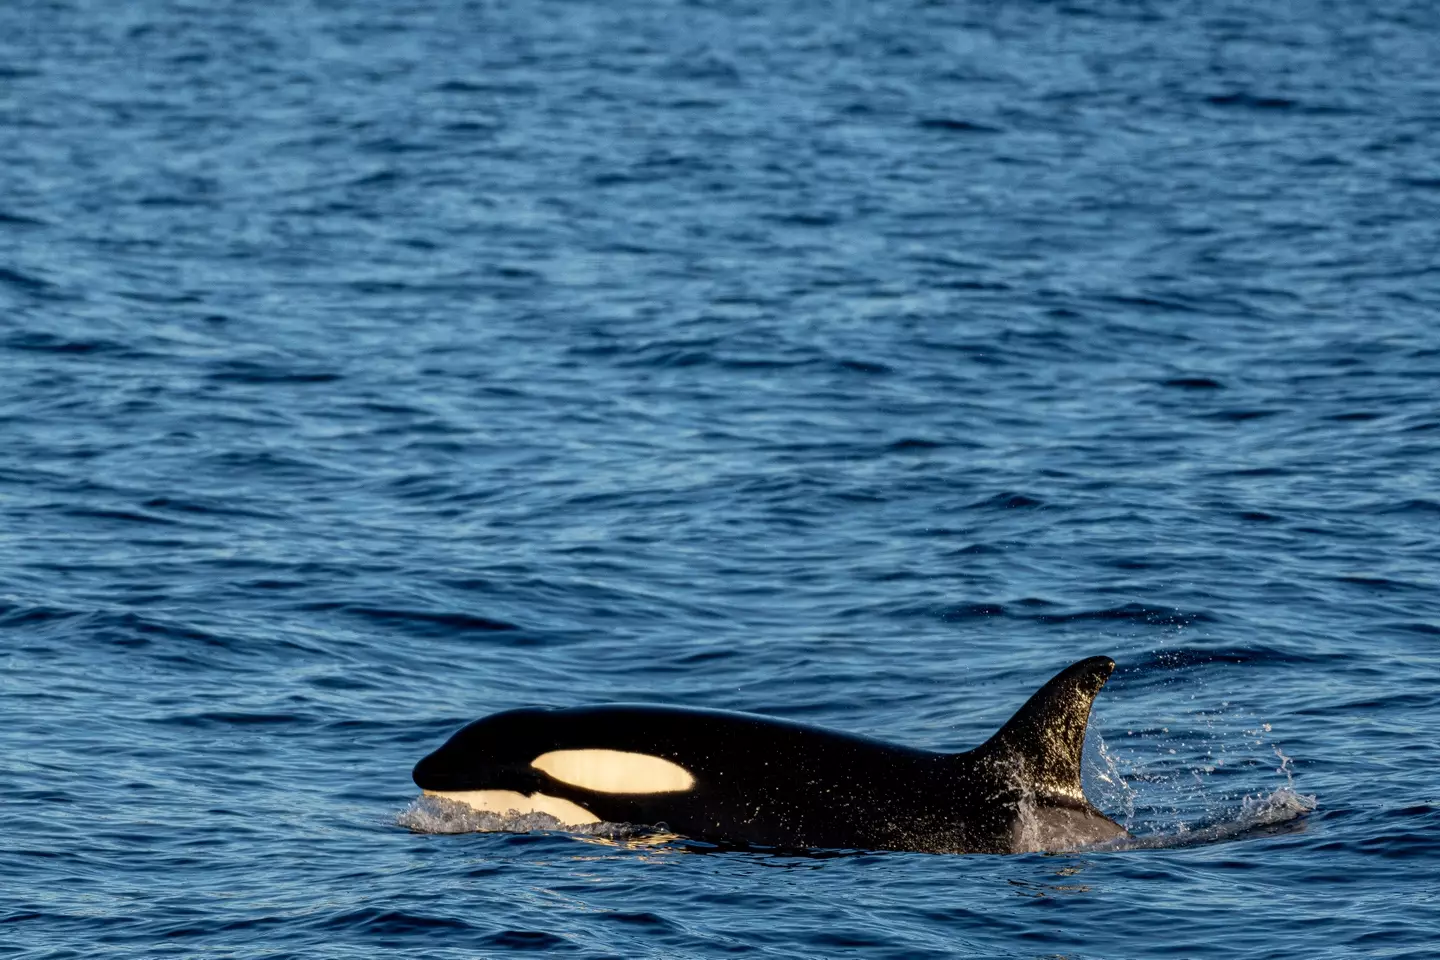 The footage shows five orcas stalking and killing their prey.